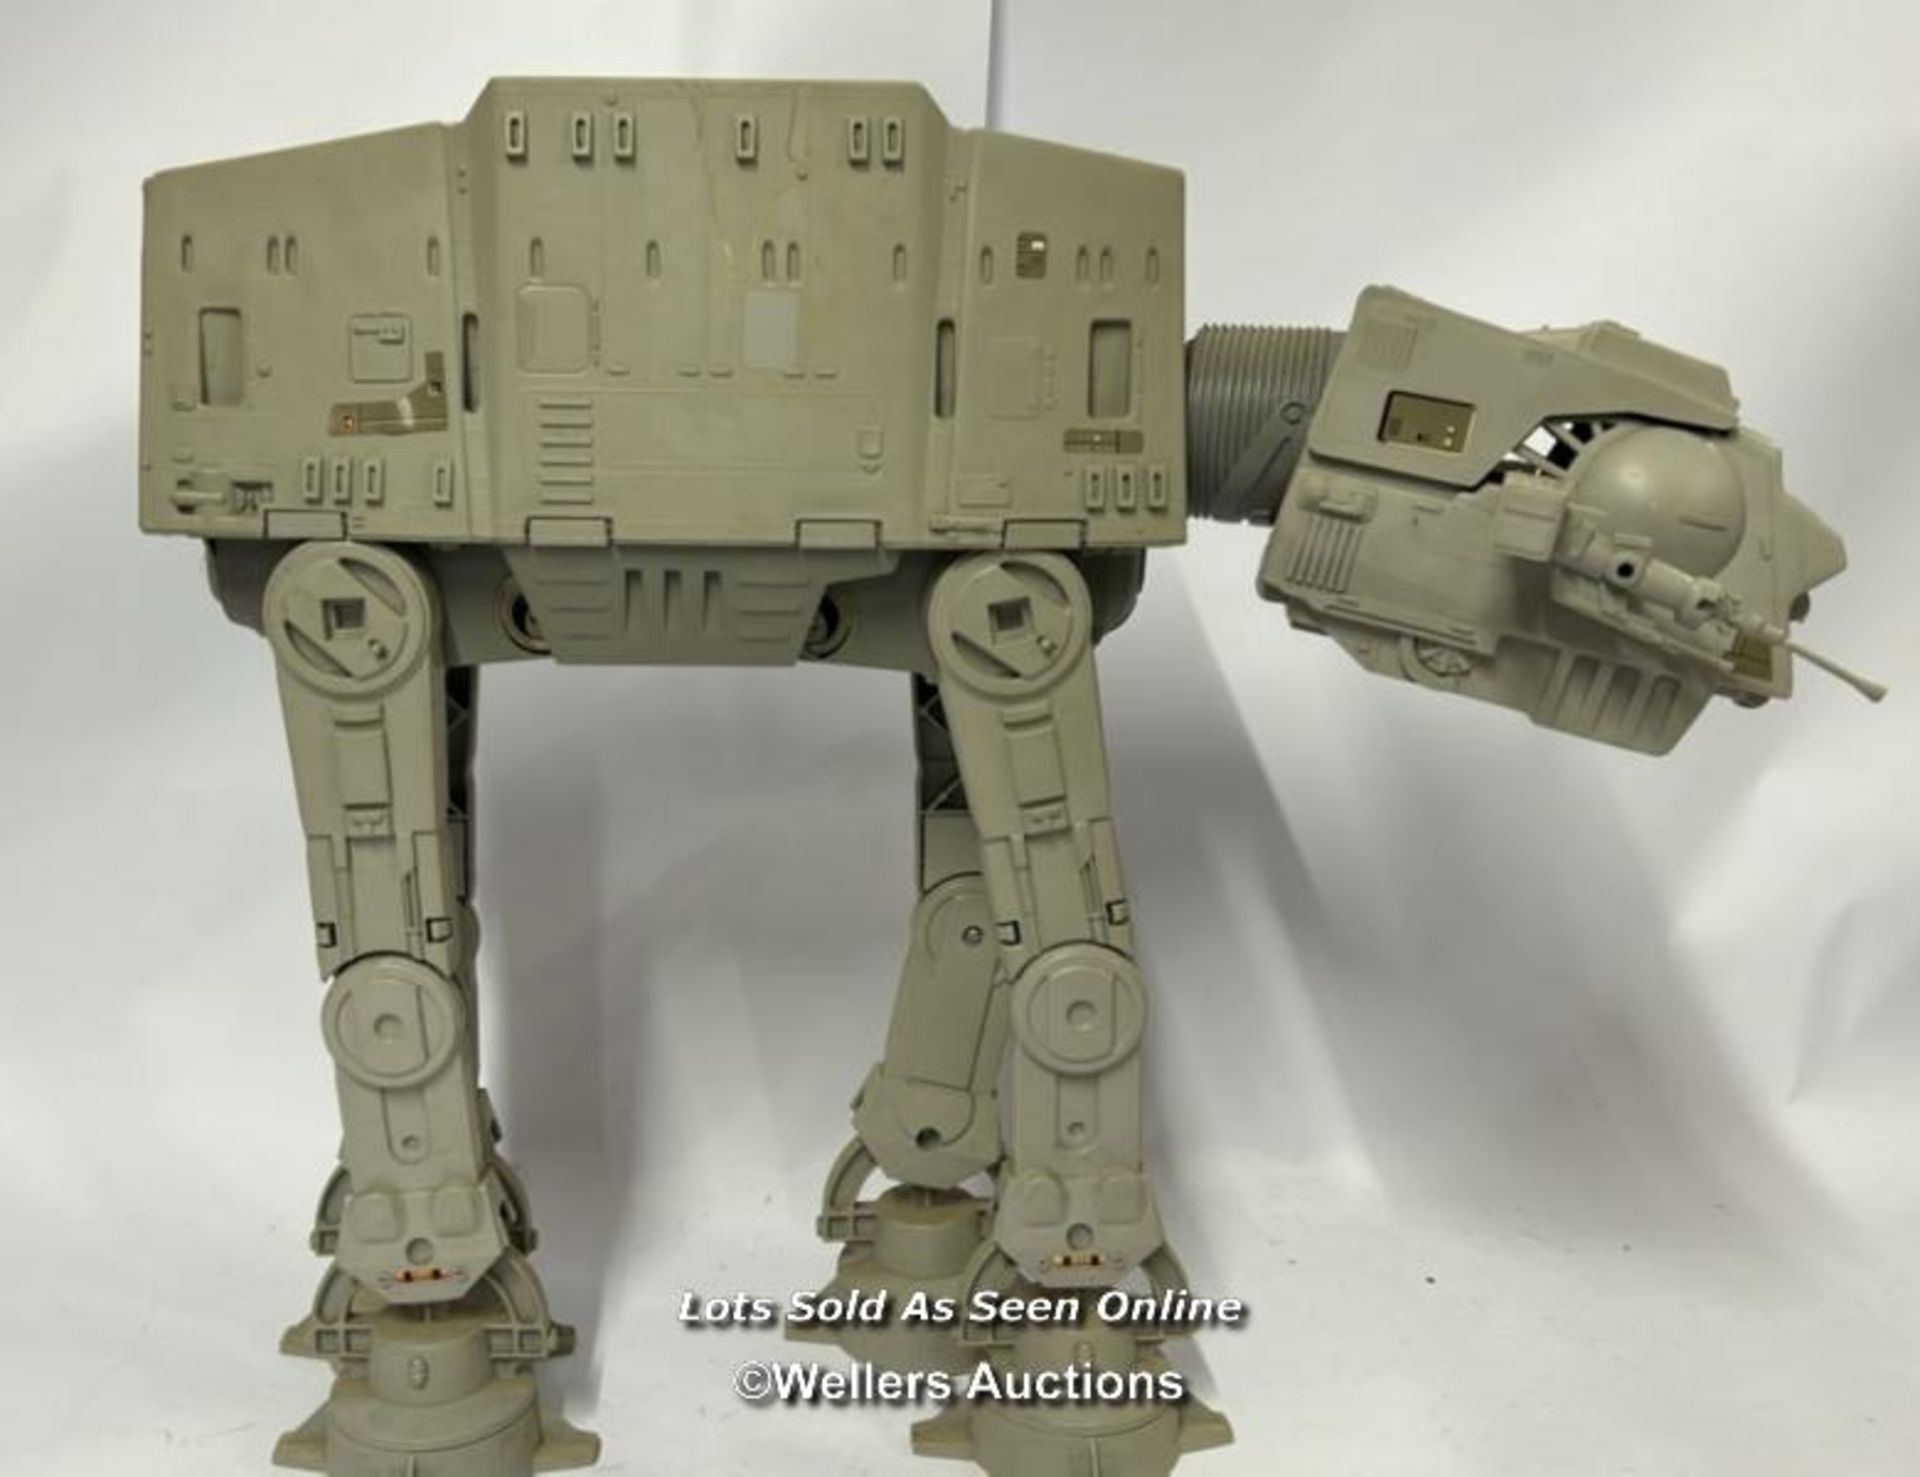 Kenner Star Wars 'The Empire Strikes Back' AT-AT, used condition but complete, chin guns yellowed - Image 2 of 9